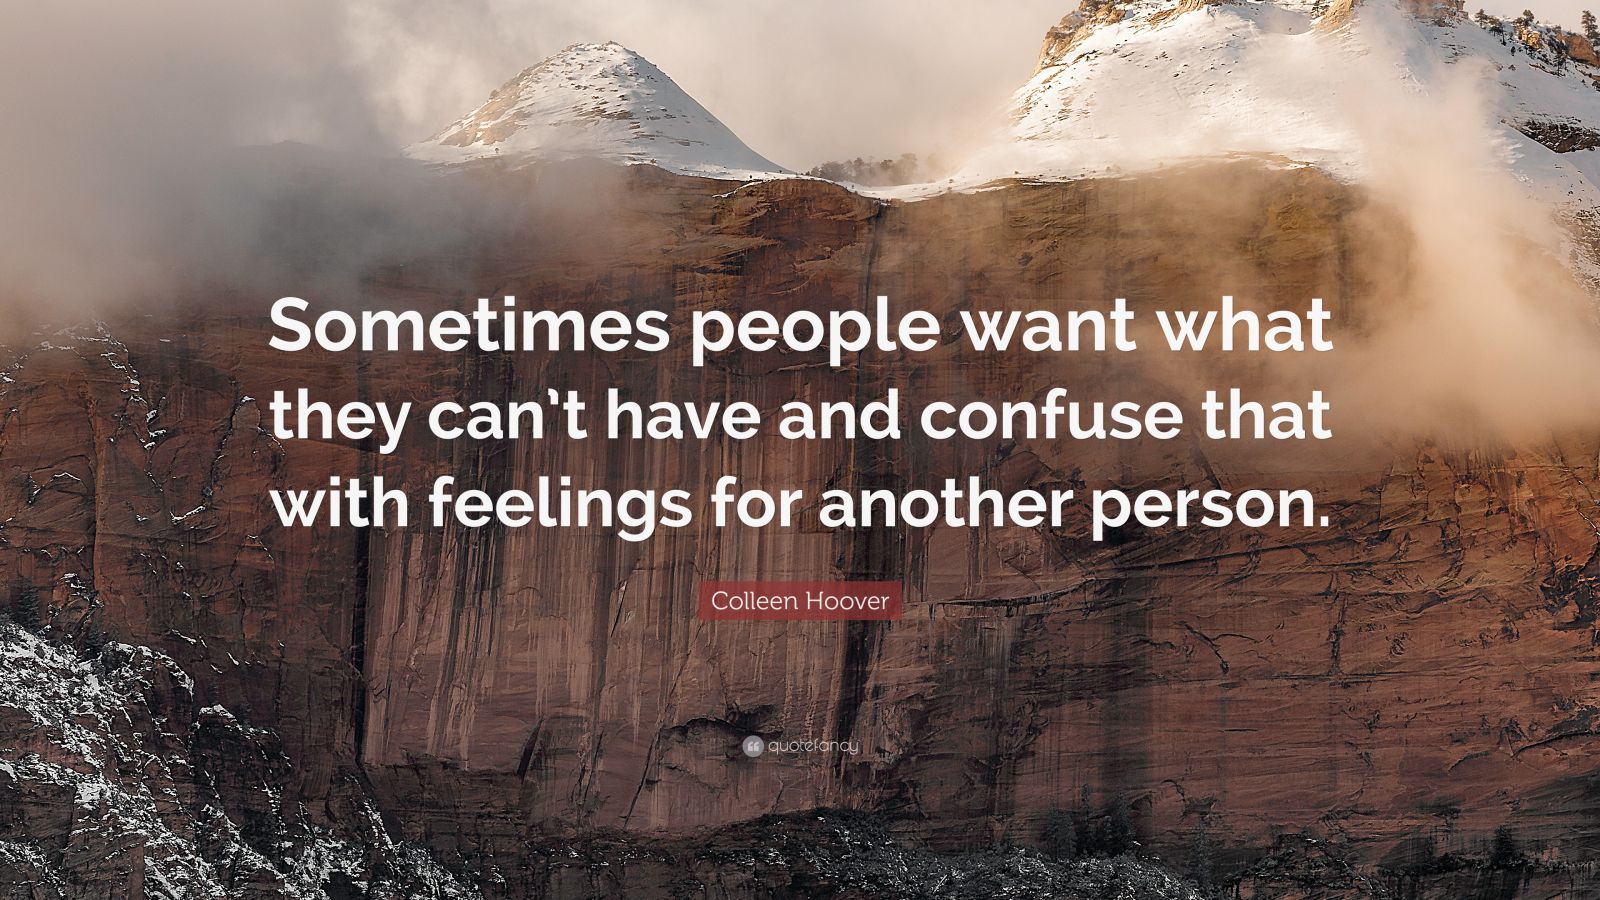 Colleen Hoover Quote: “Sometimes people want what they can’t have and ...